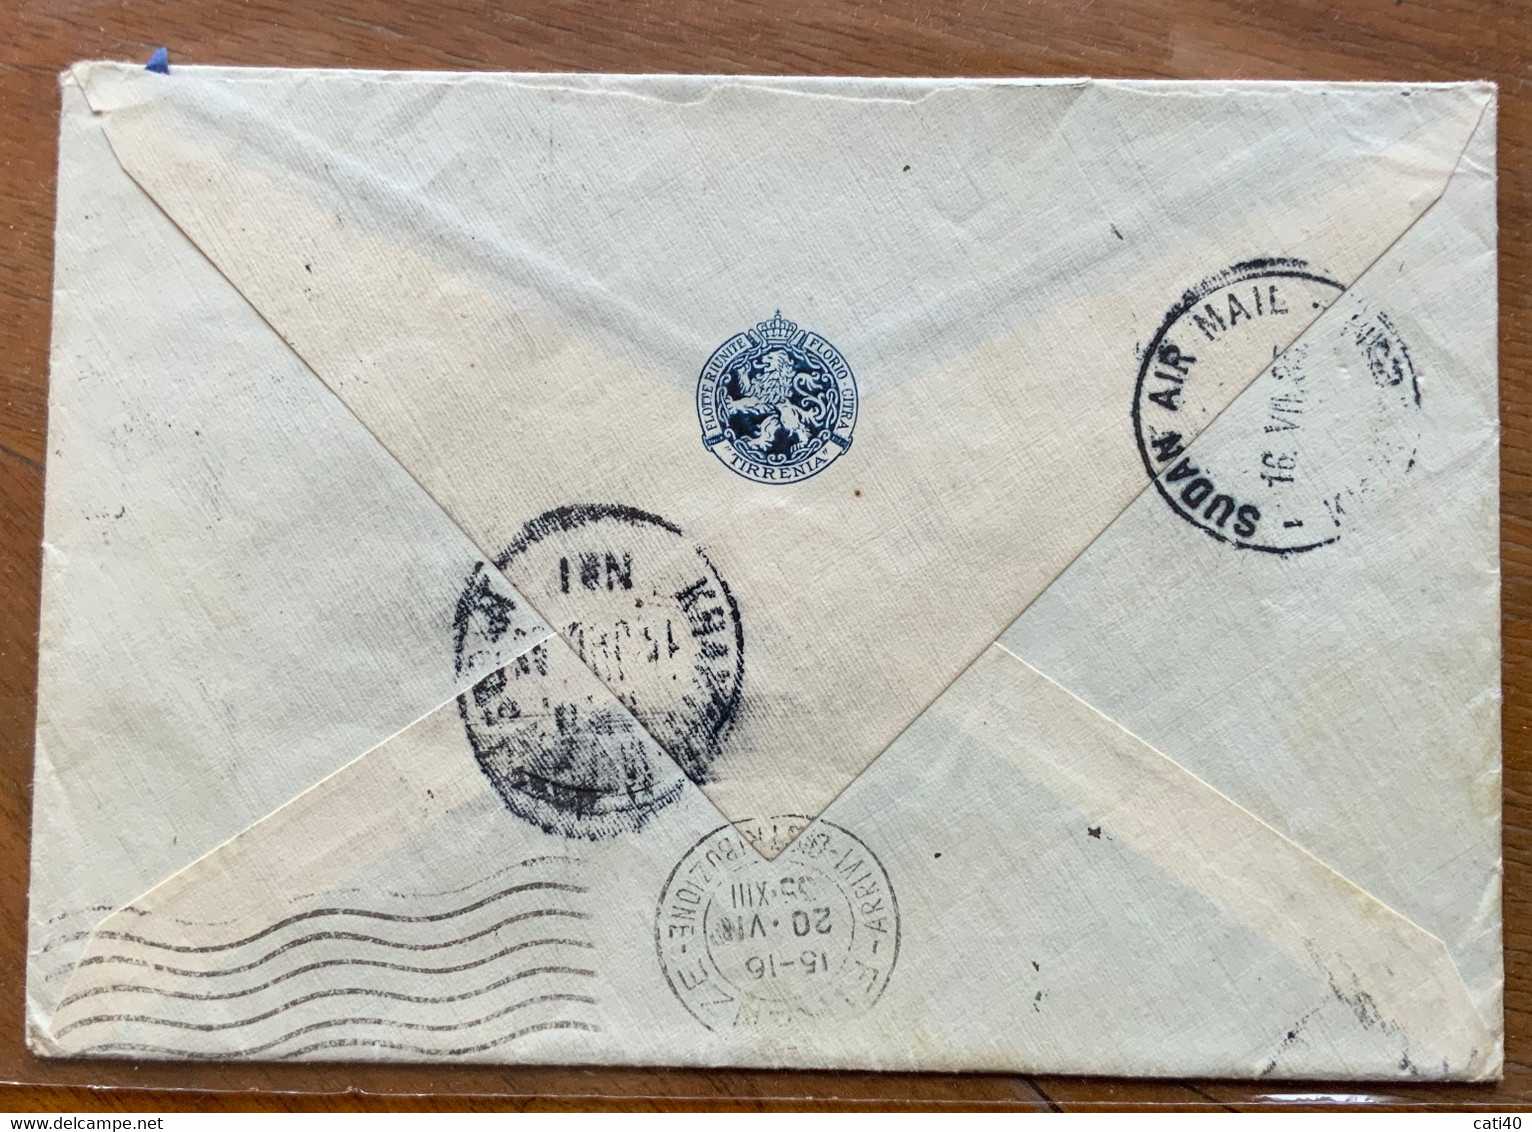 FLOTTE RIUNITE FLORIO - CITRA - TIRRENIA - SUD AN AIR MAIL With 3 PIASTRES/4,5   FROM PORT SAID 13 VII 35  TO FIRENZE - South Sudan